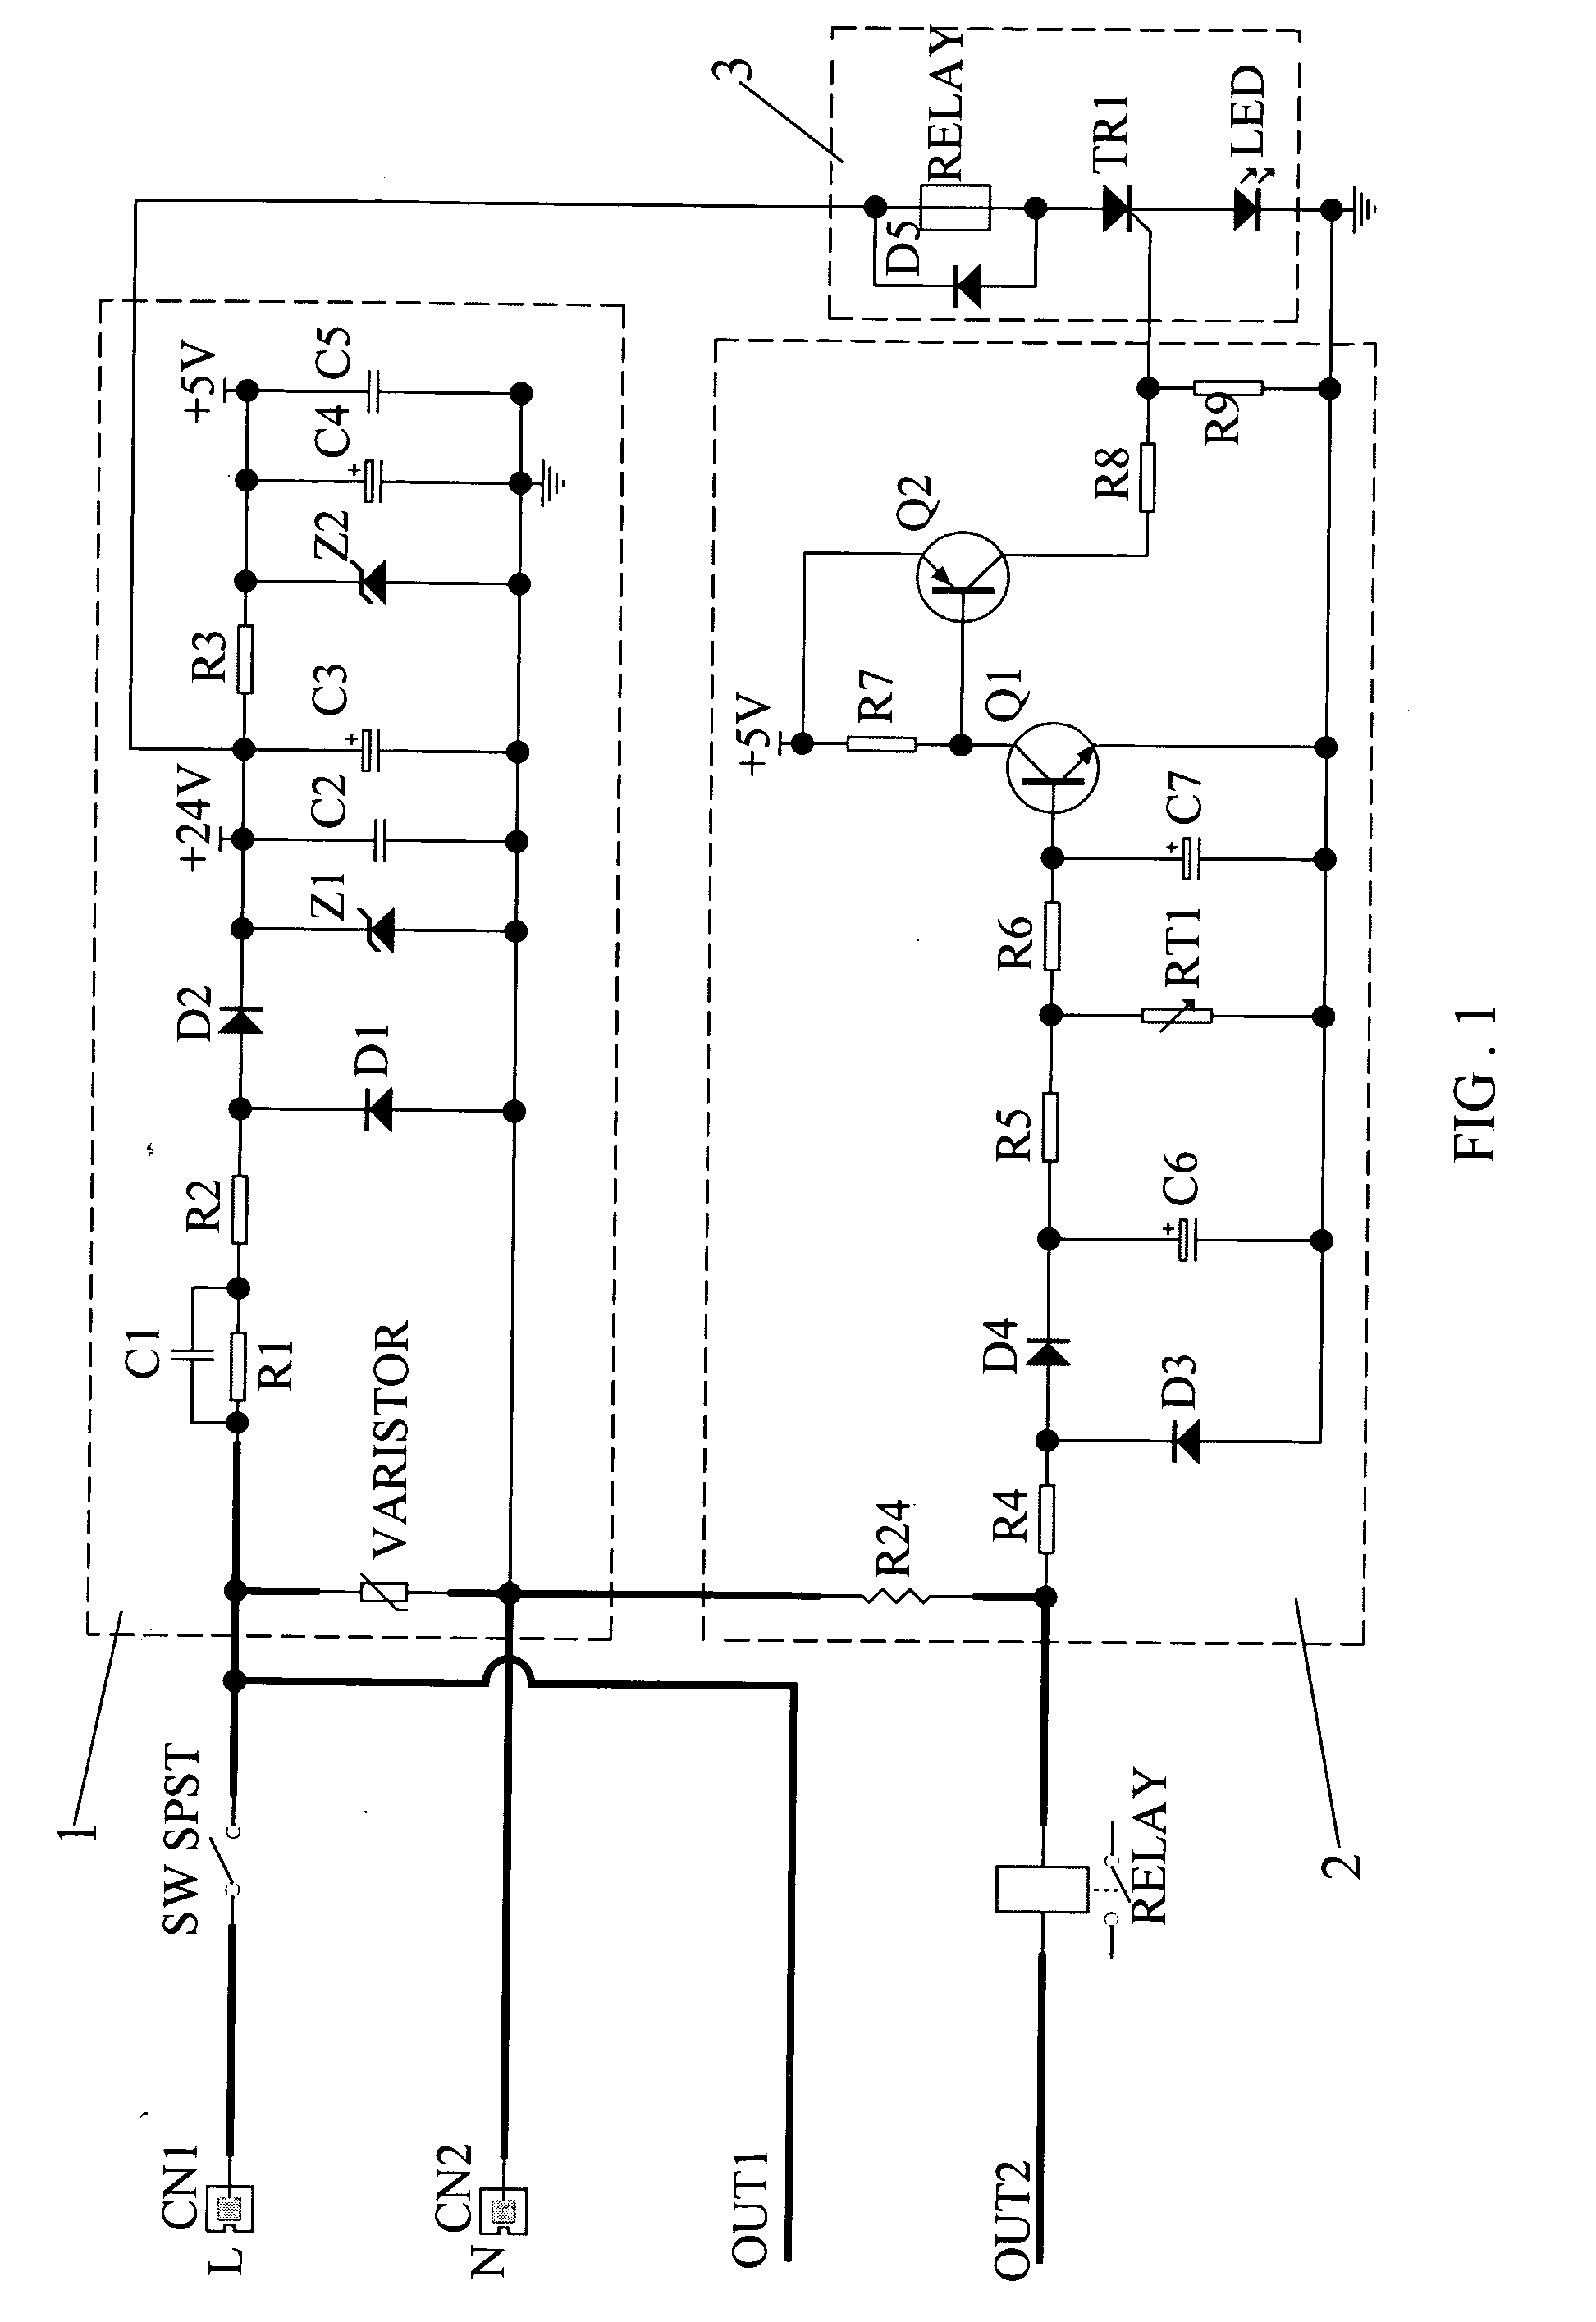 Light-adjusting and current-limiting control circuit